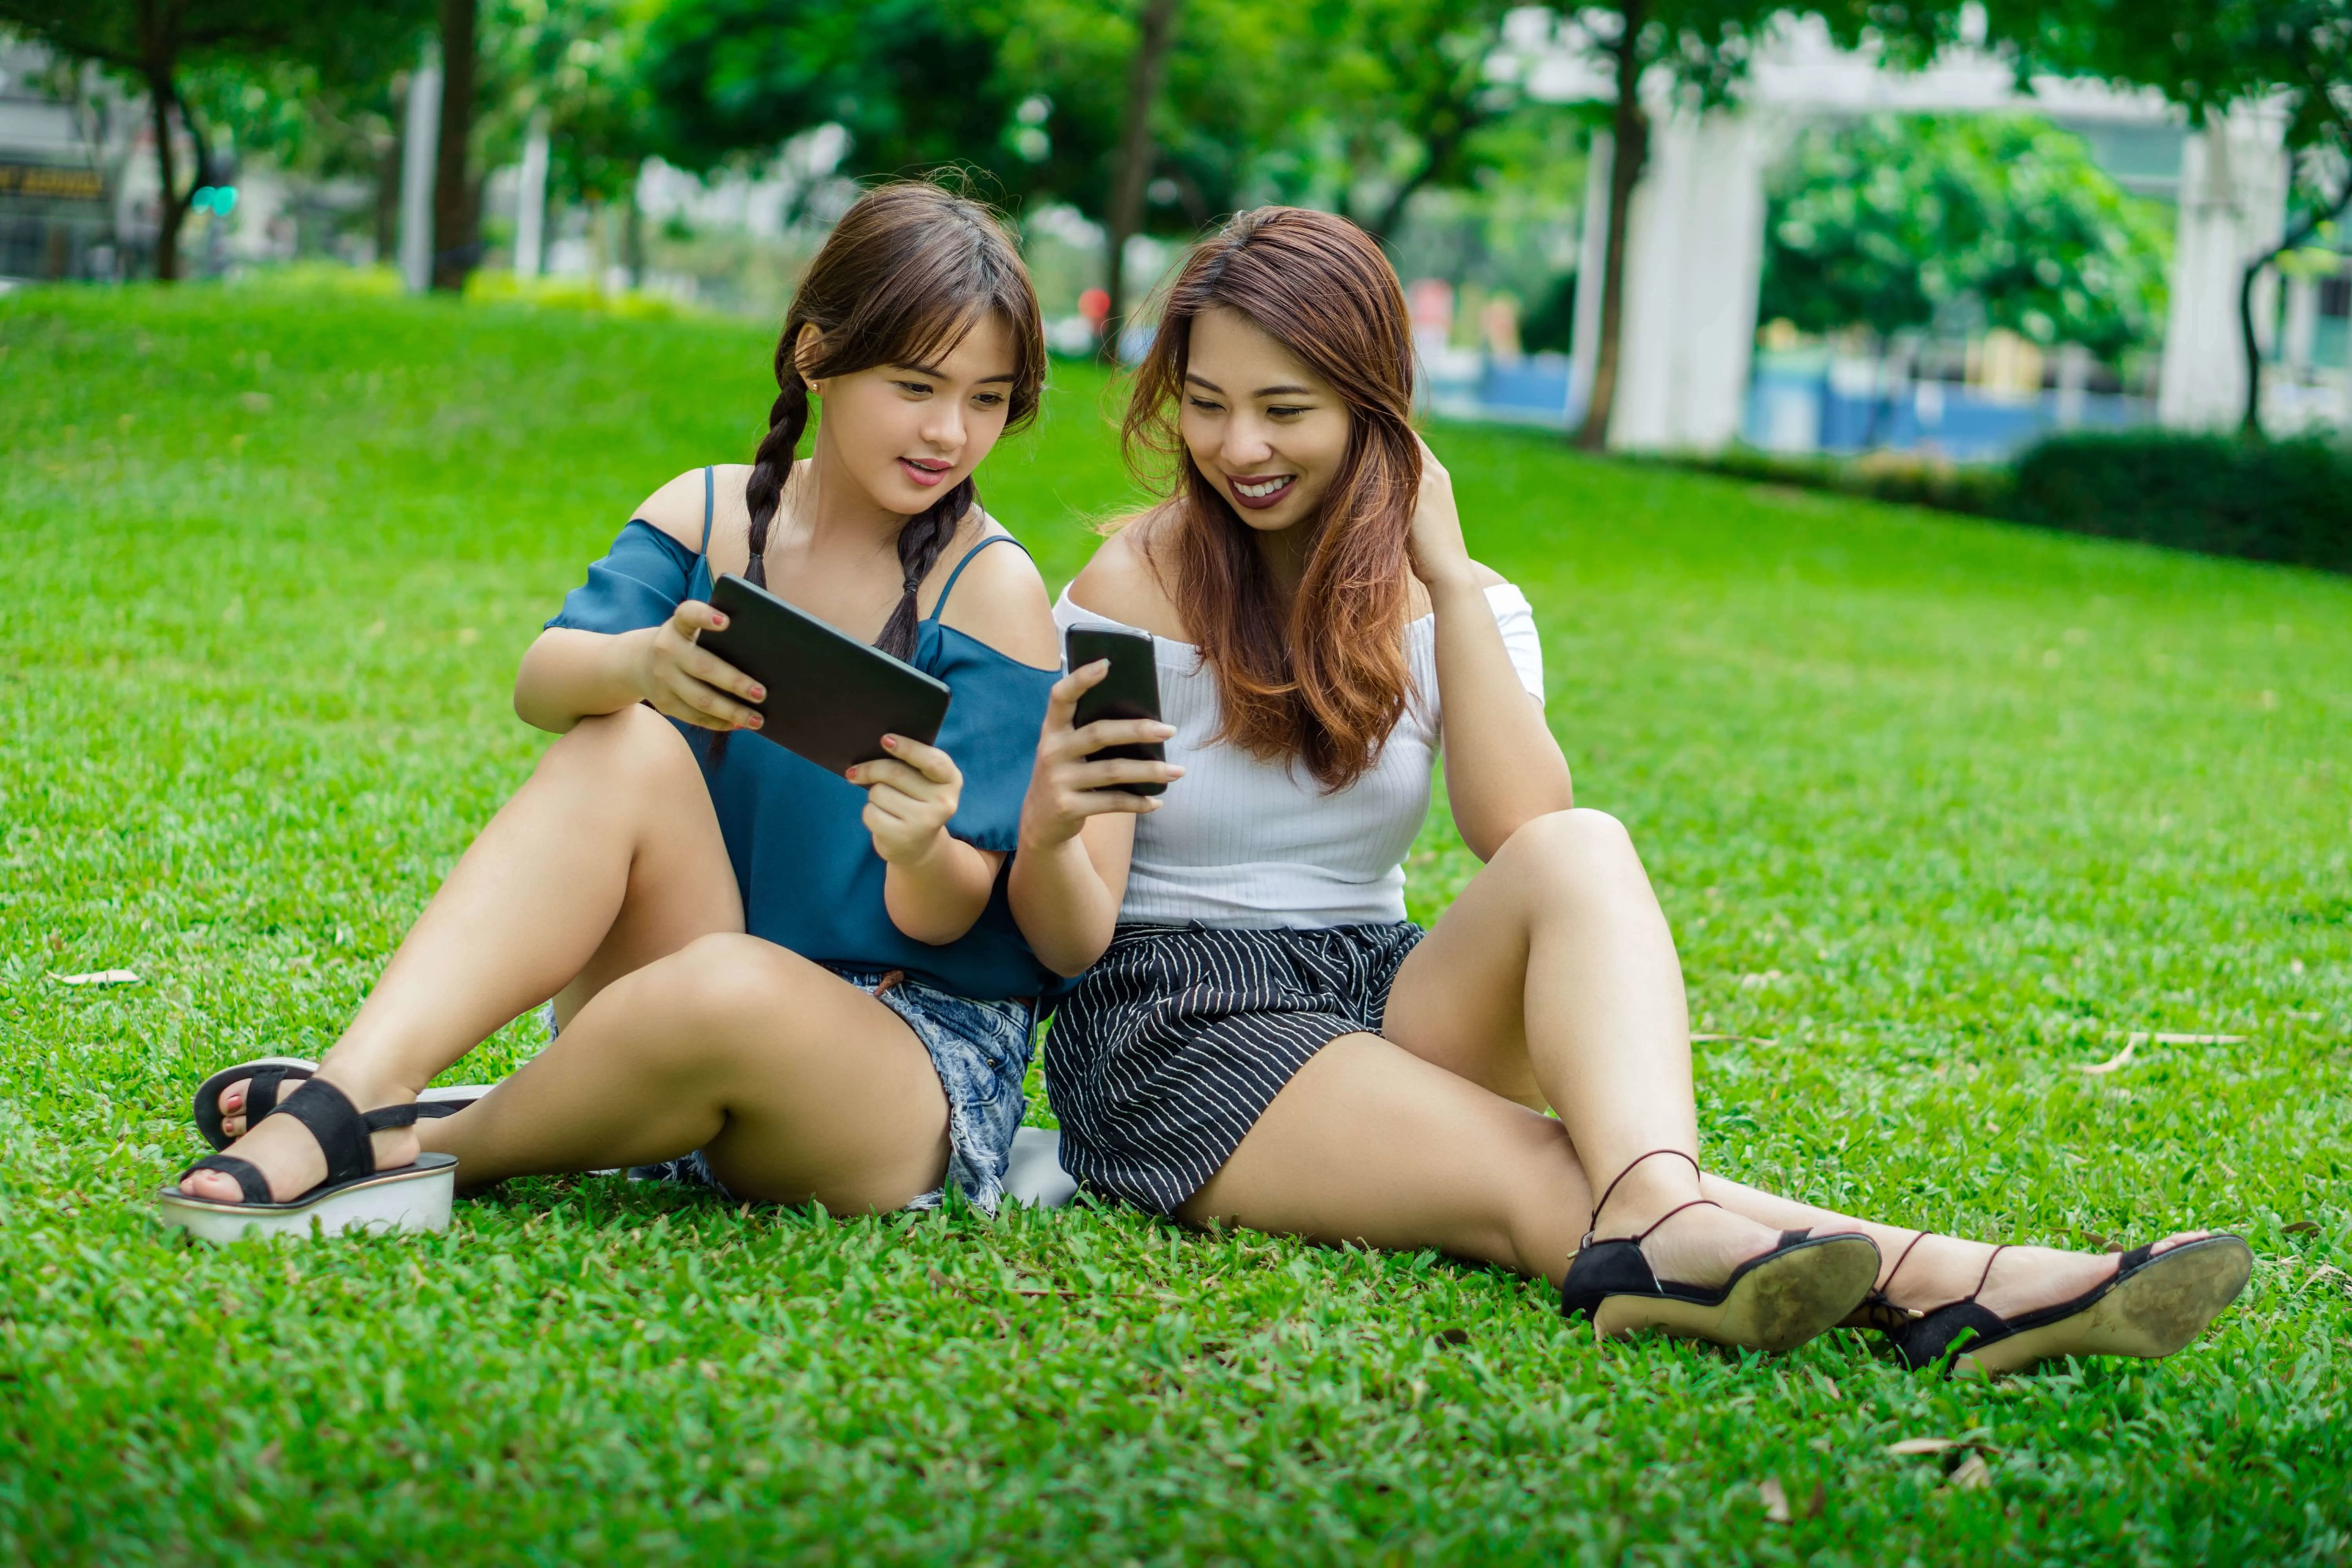 Two girls sitting on grass and looking at their phones